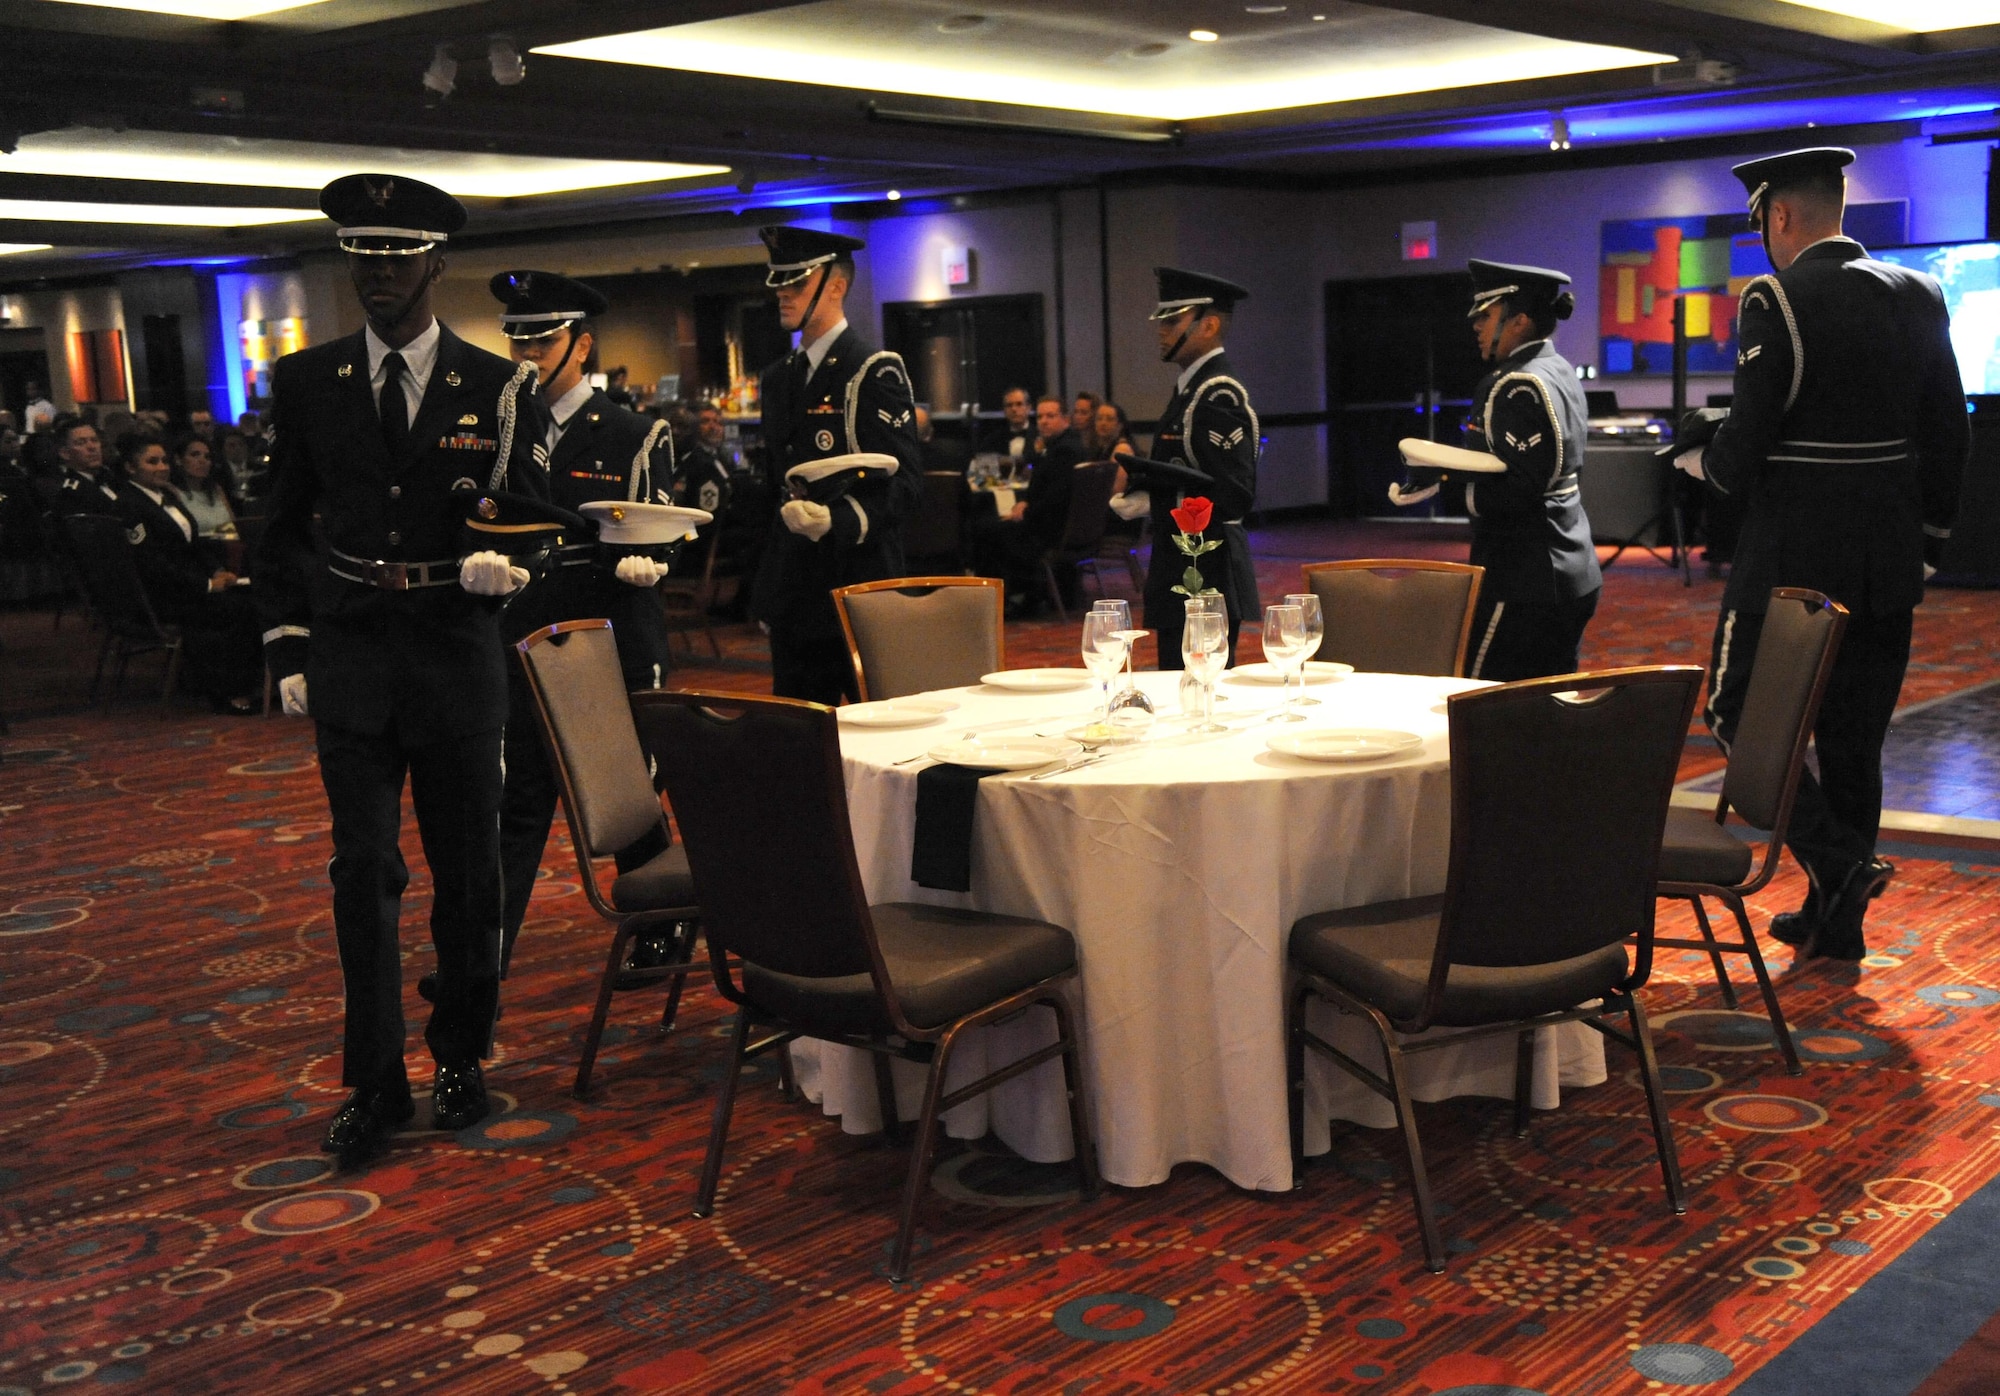 Members of the Keesler Air Force Base Honor Guard perform a POW/MIA table ceremony during the Keesler Air Force Ball at the Imperial Palace Casino Sept. 24, 2016, Biloxi, Miss. The event was sponsored by the Air Force Association John C. Stennis Chapter #332 to celebrate the Air Force’s 69th birthday and the base’s 75th anniversary. (U.S. Air Force photo by Kemberly Groue/Released)